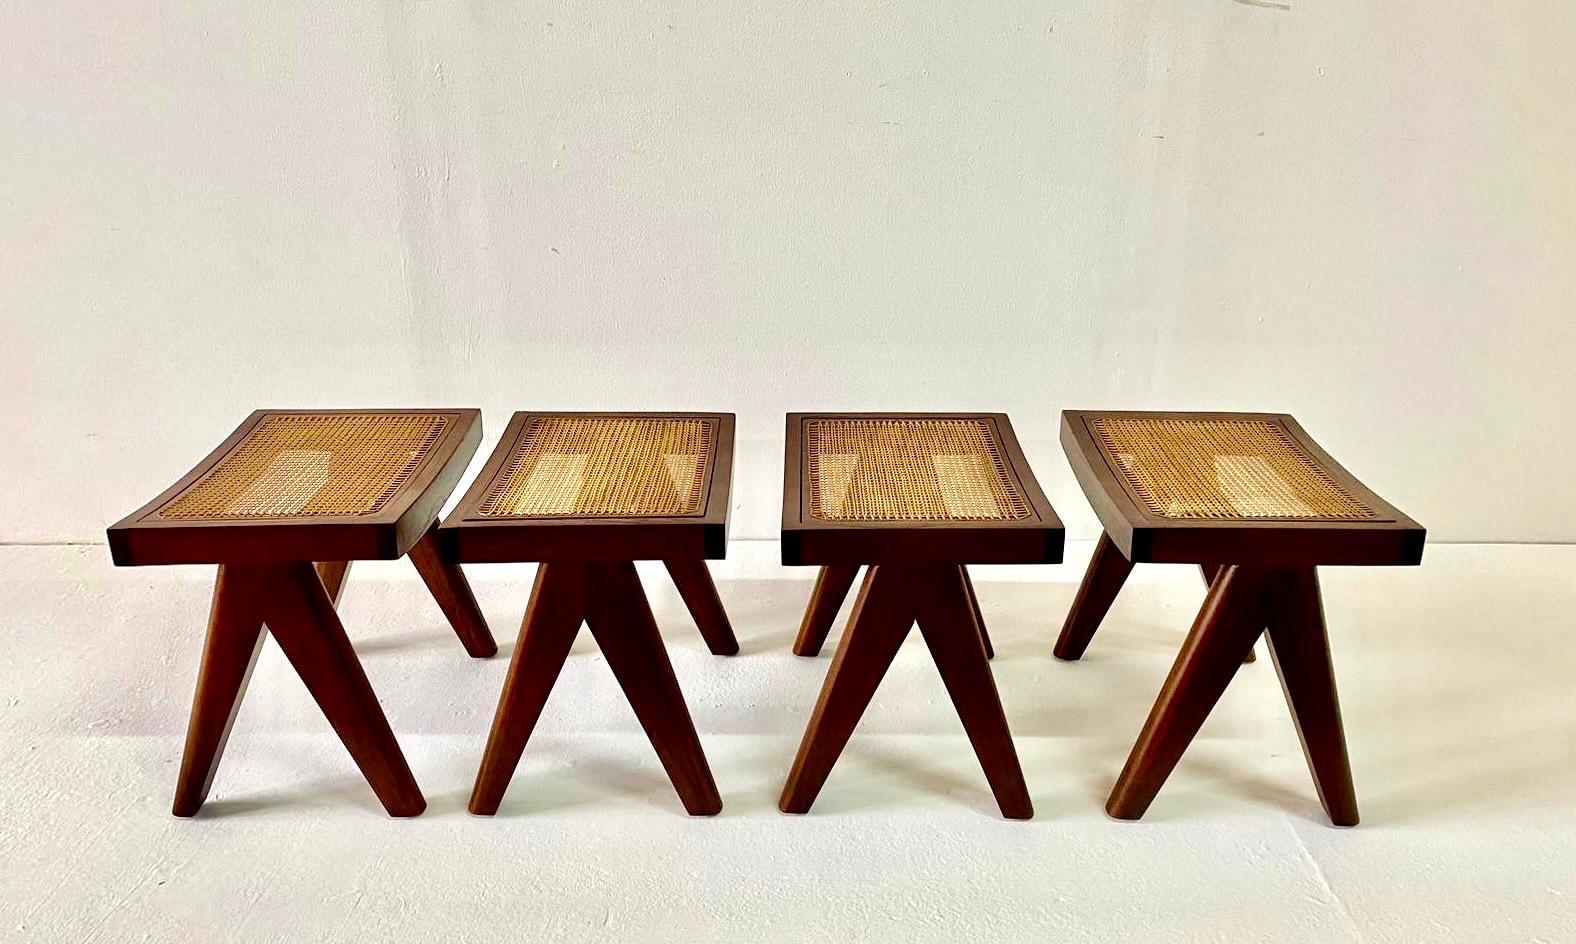 Studio Made Heavy Teak Stools - Manner of Jeanneret (2 Pairs Available) For Sale 10